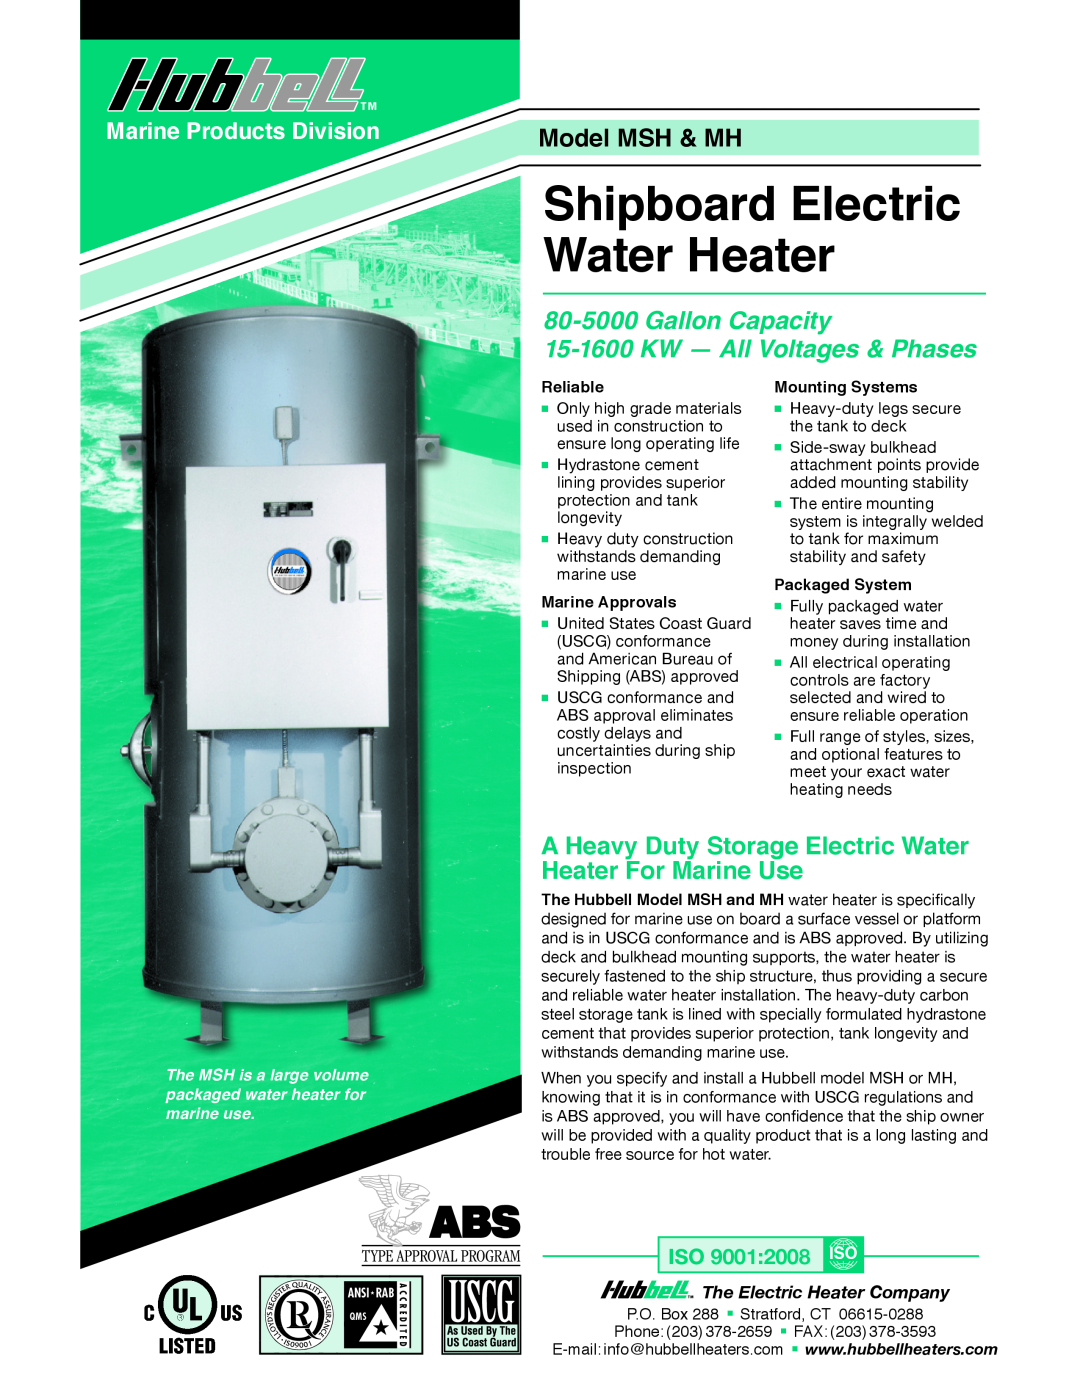 Hubbell manual Model MSH & MH, Shipboard Electric Water Heater, 80-5000Gallon Capacity, Marine Products Division 